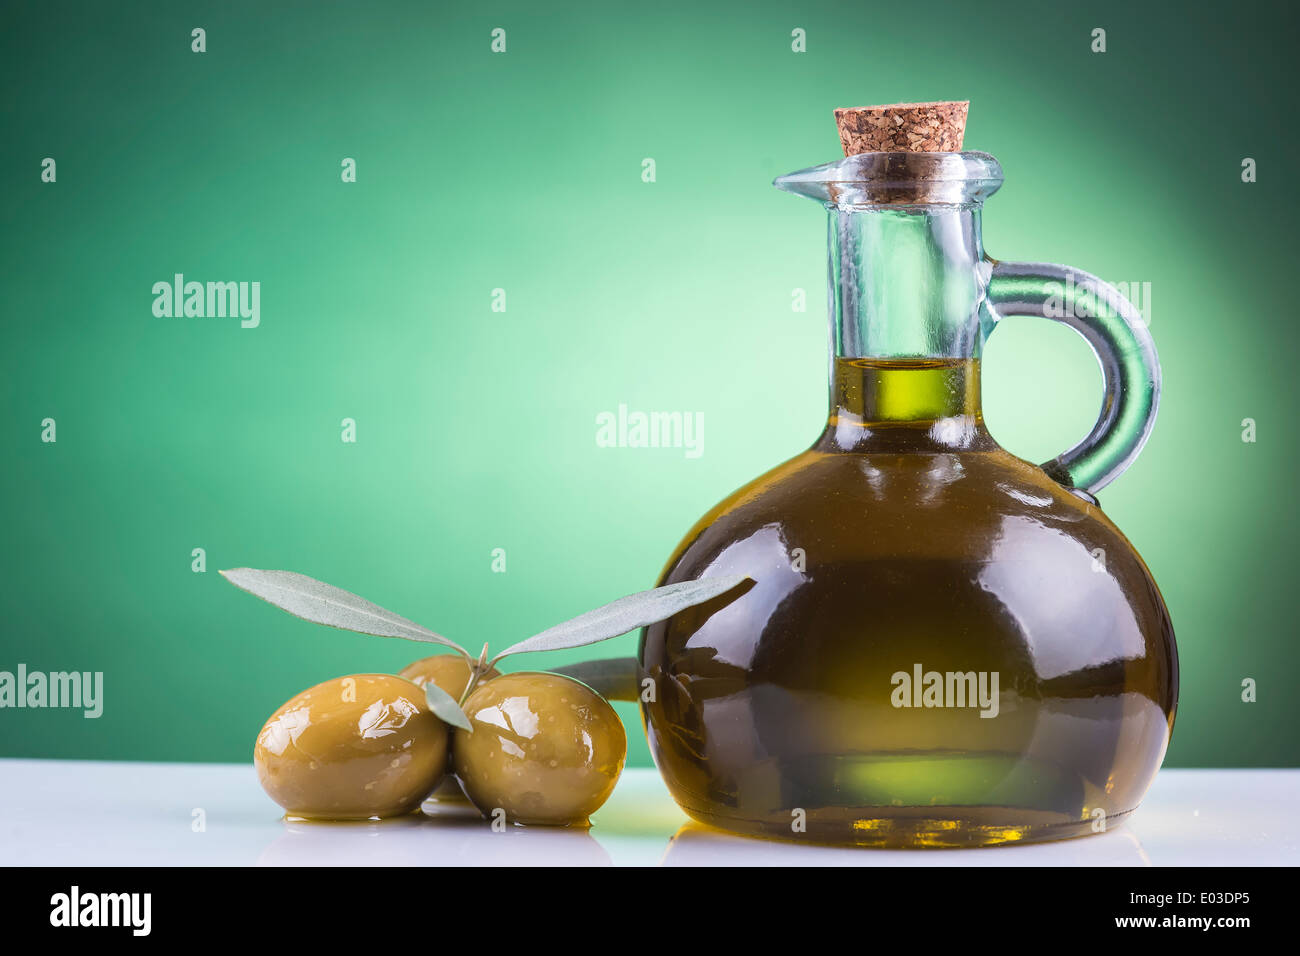 Olive oil bottle and olives on a green spotlight background Stock Photo